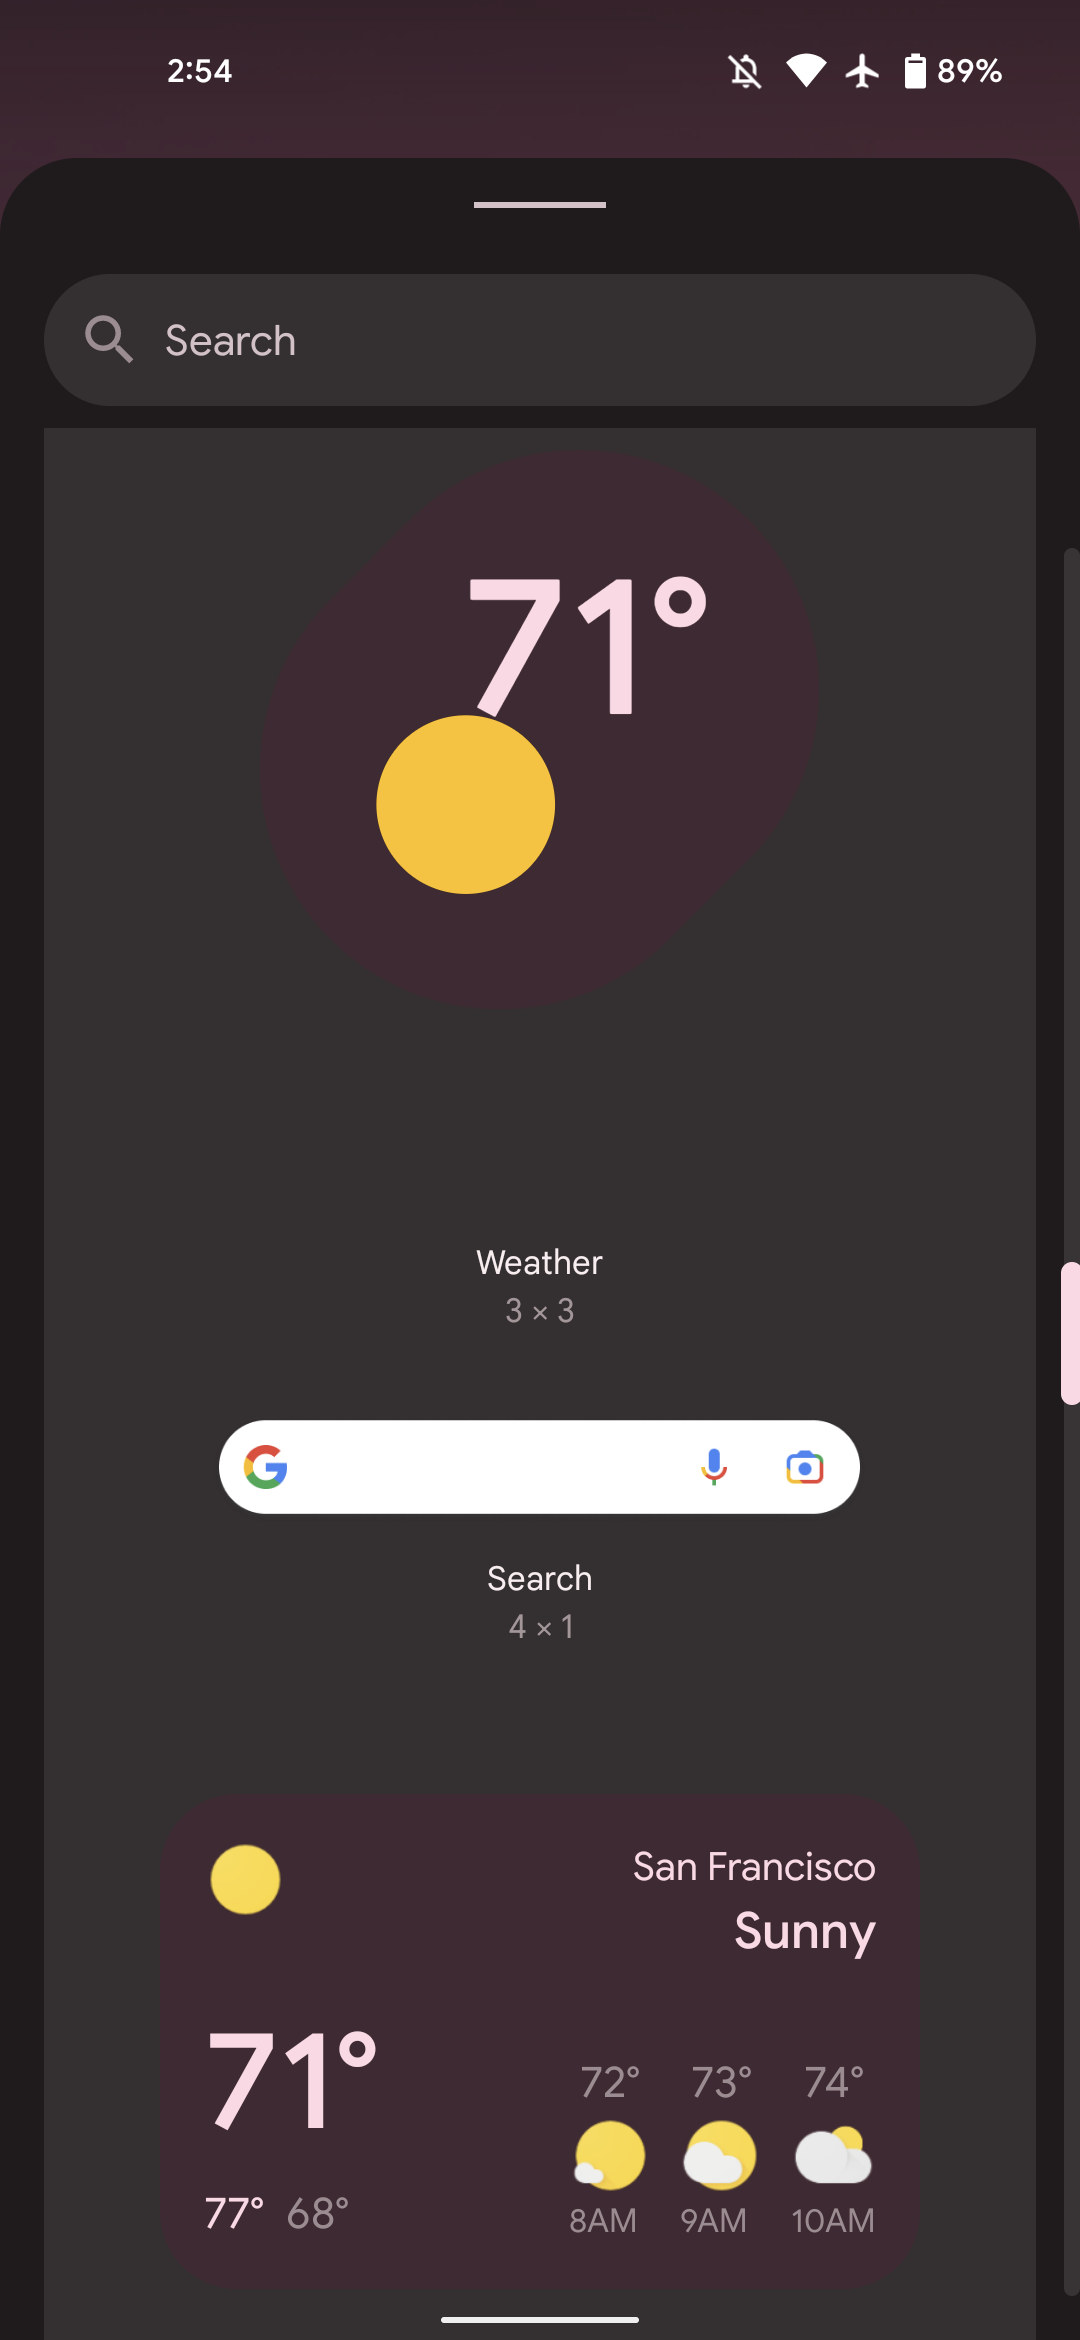 Material You widgets